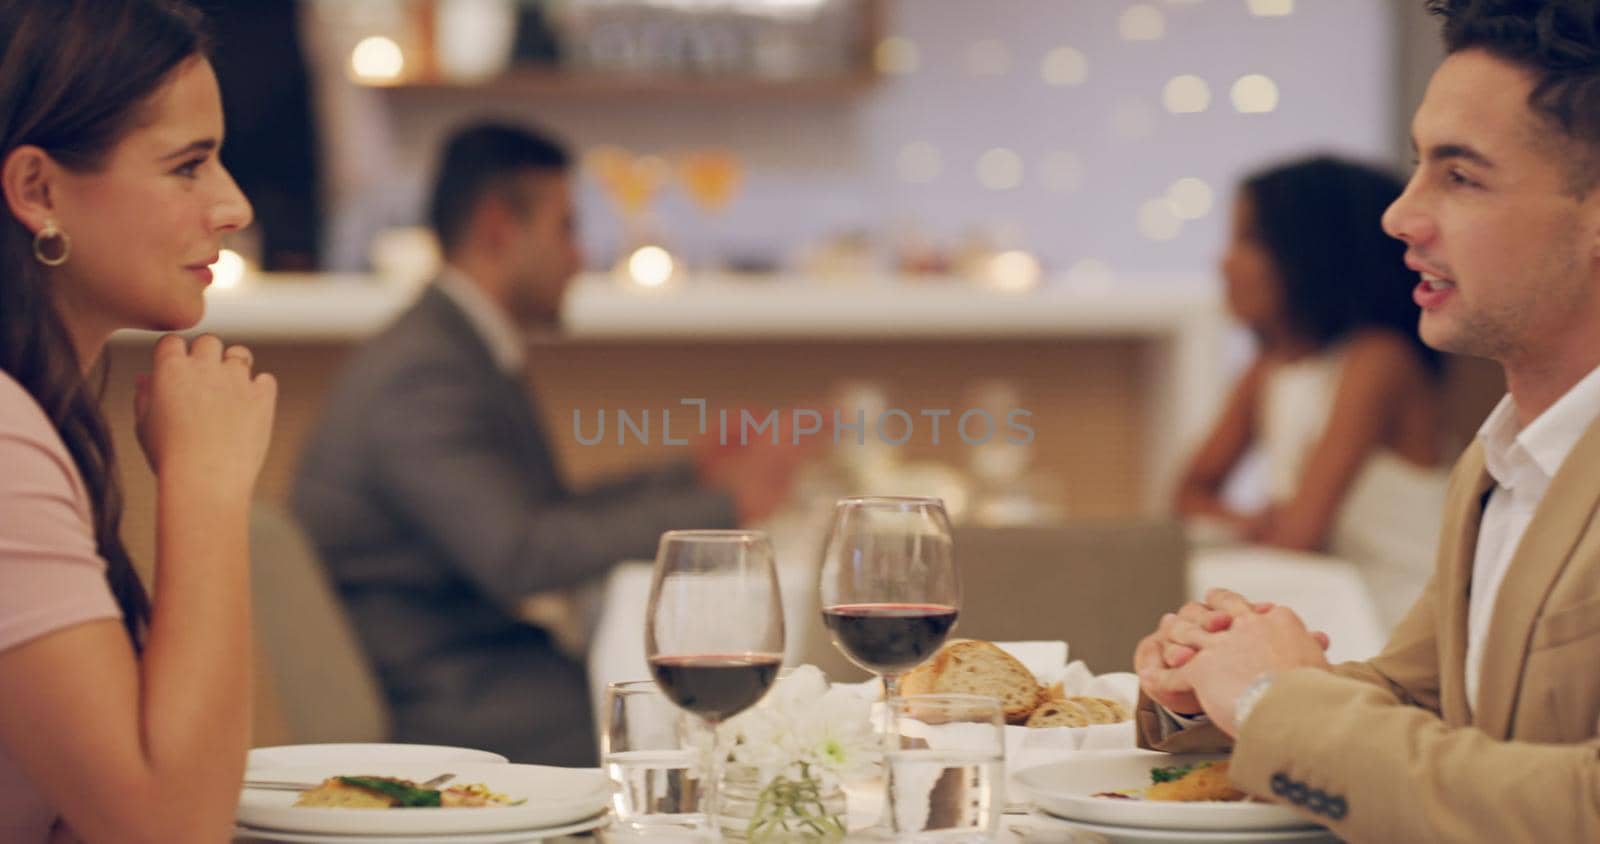 4k video footage of people enjoying themselves at a restaurant